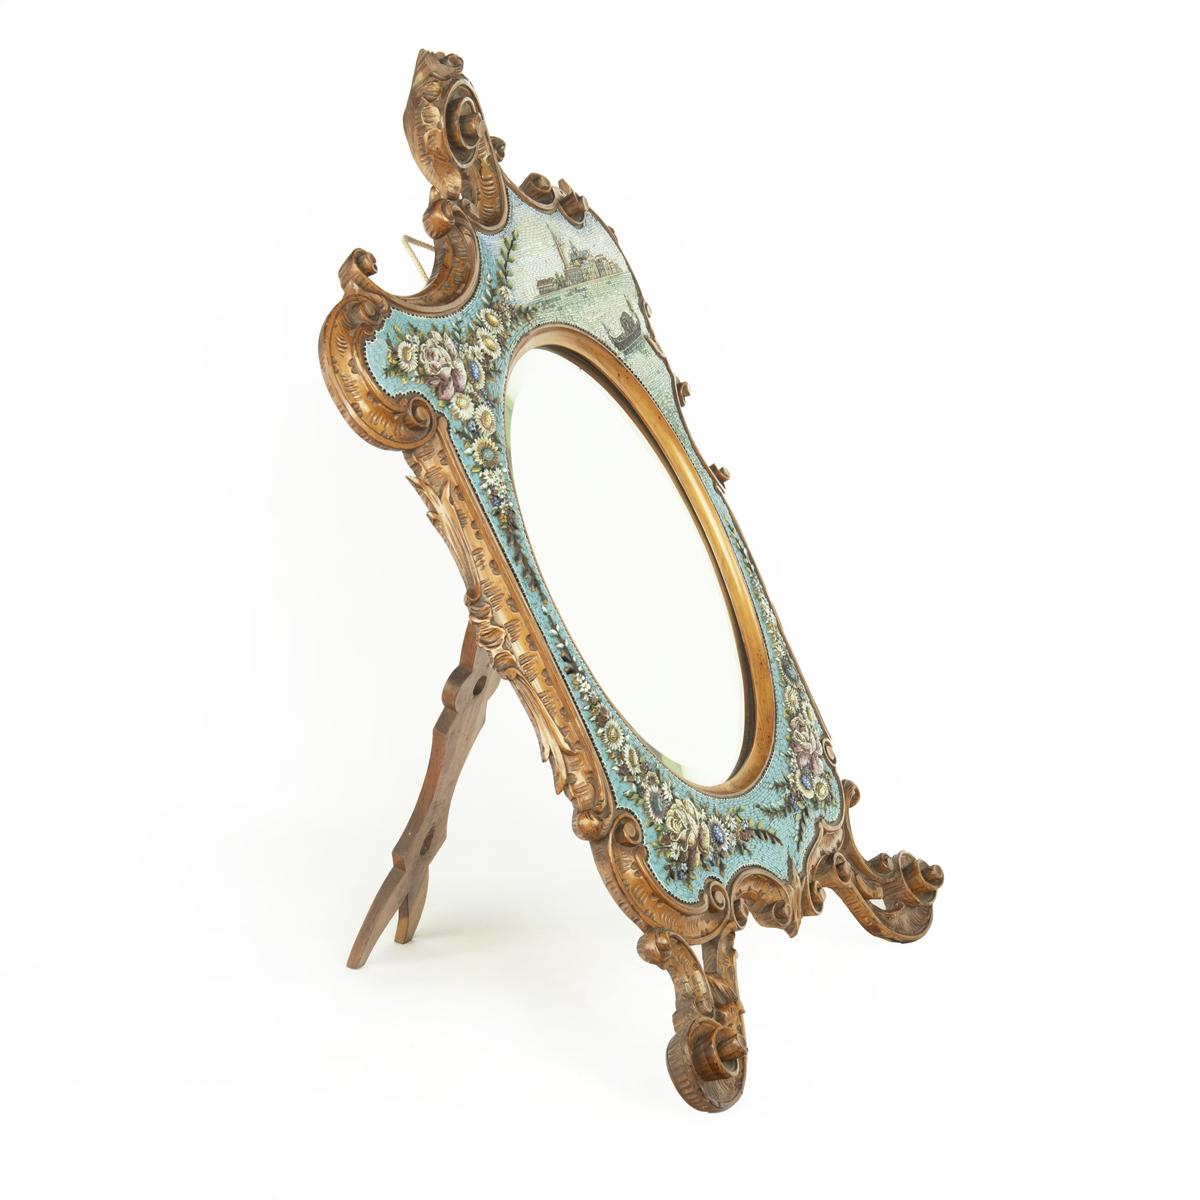 A delicate walnut easel dressing table mirror